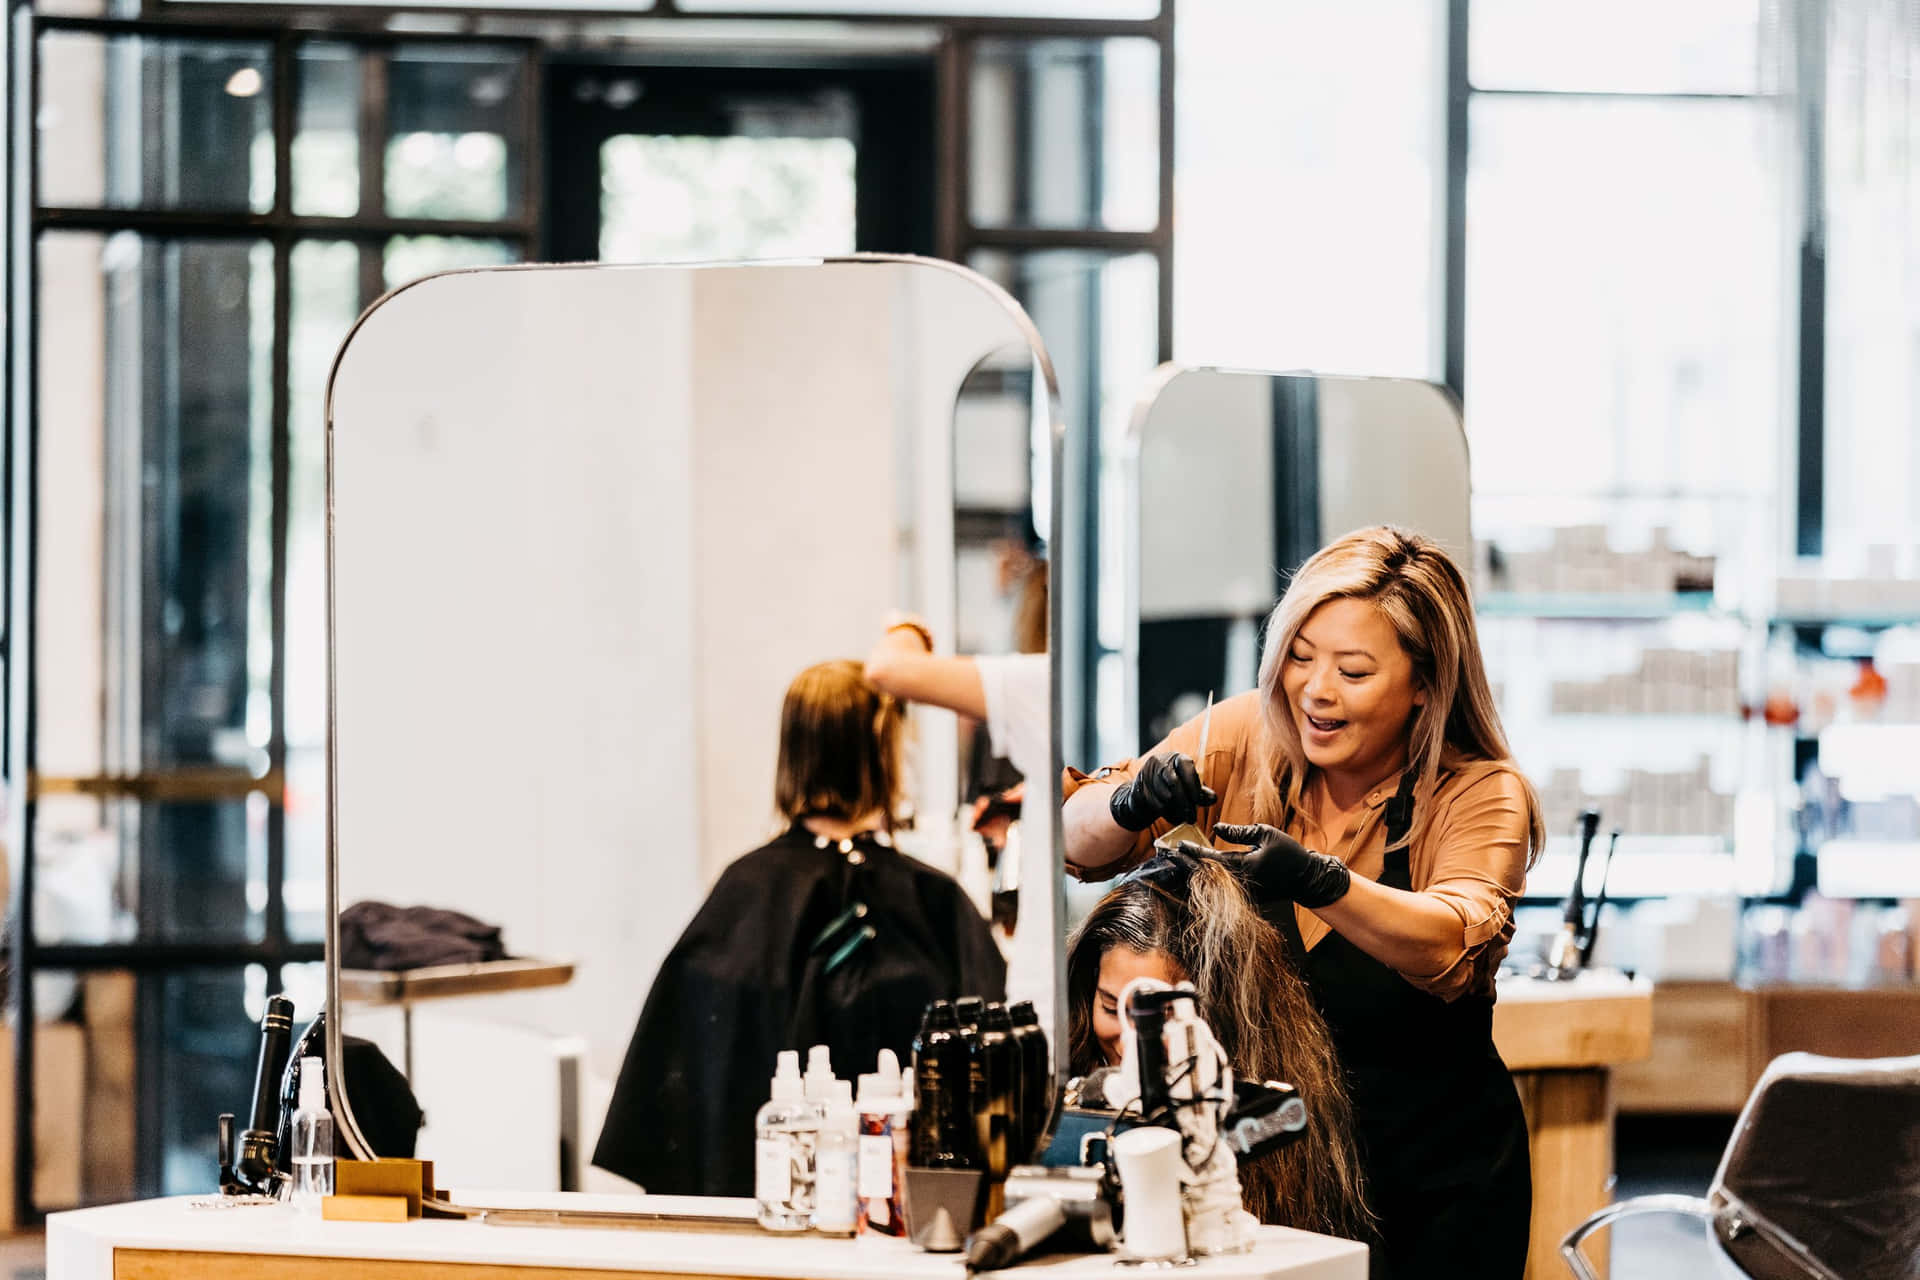 Get a completely new look at the Hair Salon.